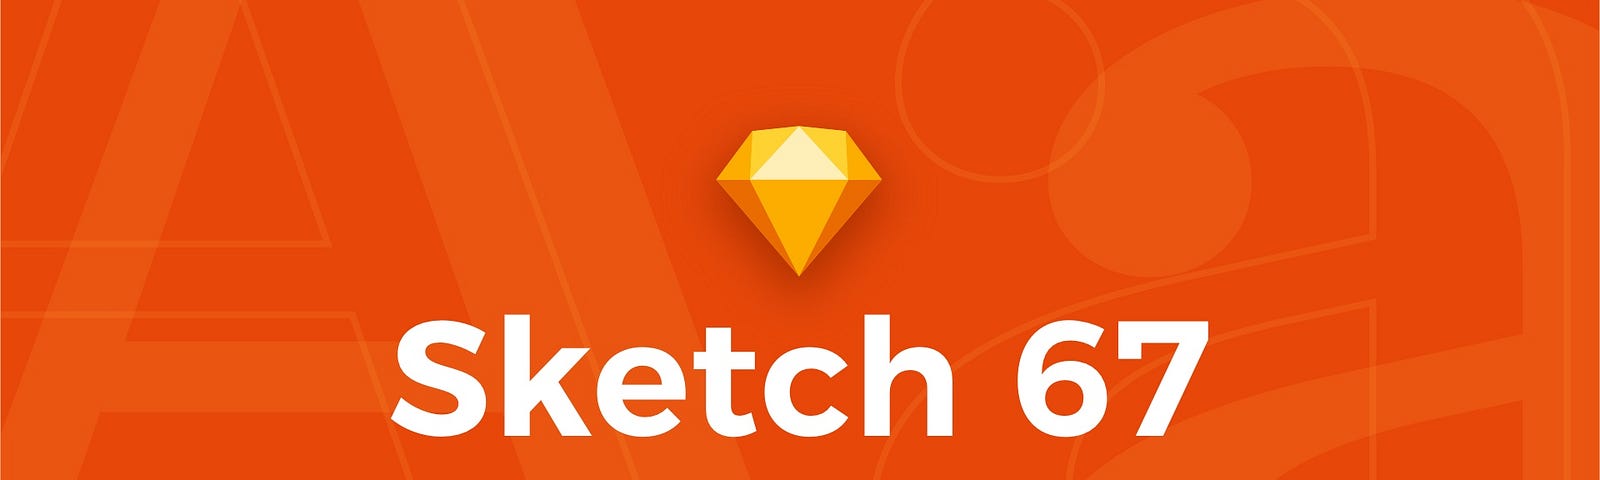 Sketch 67 featured image